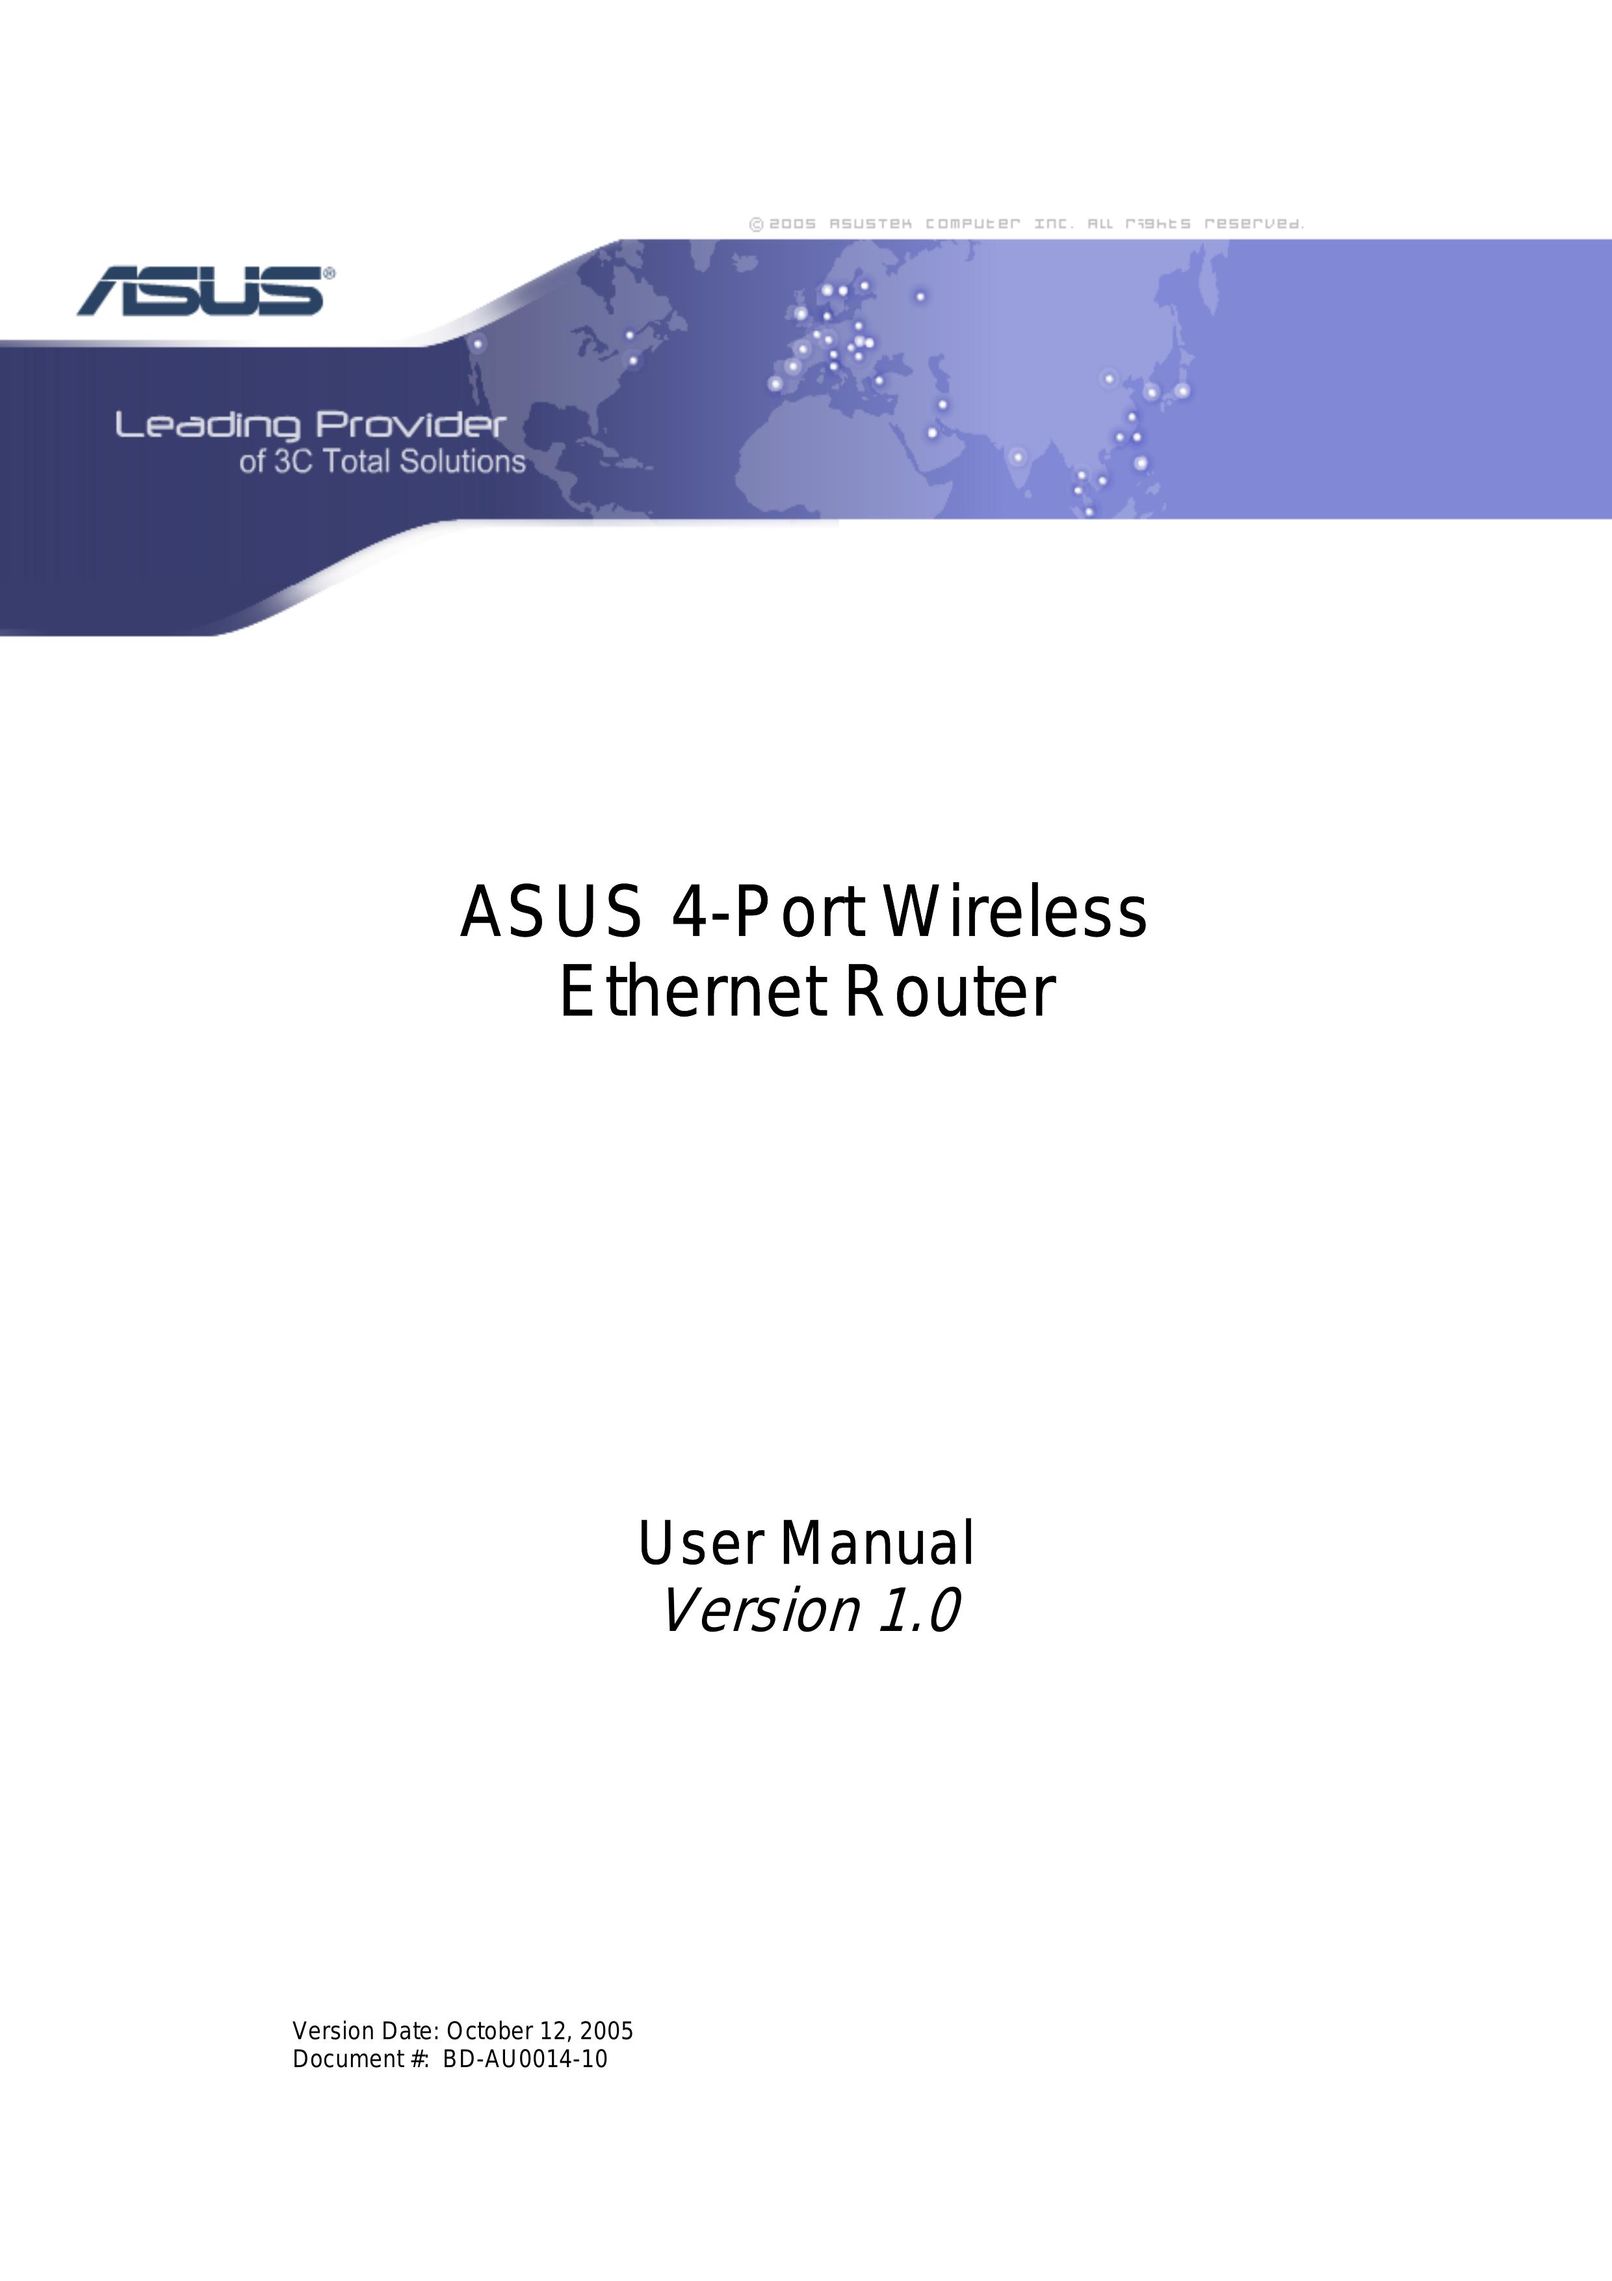 Asus BD-AU0014-10 Network Router User Manual